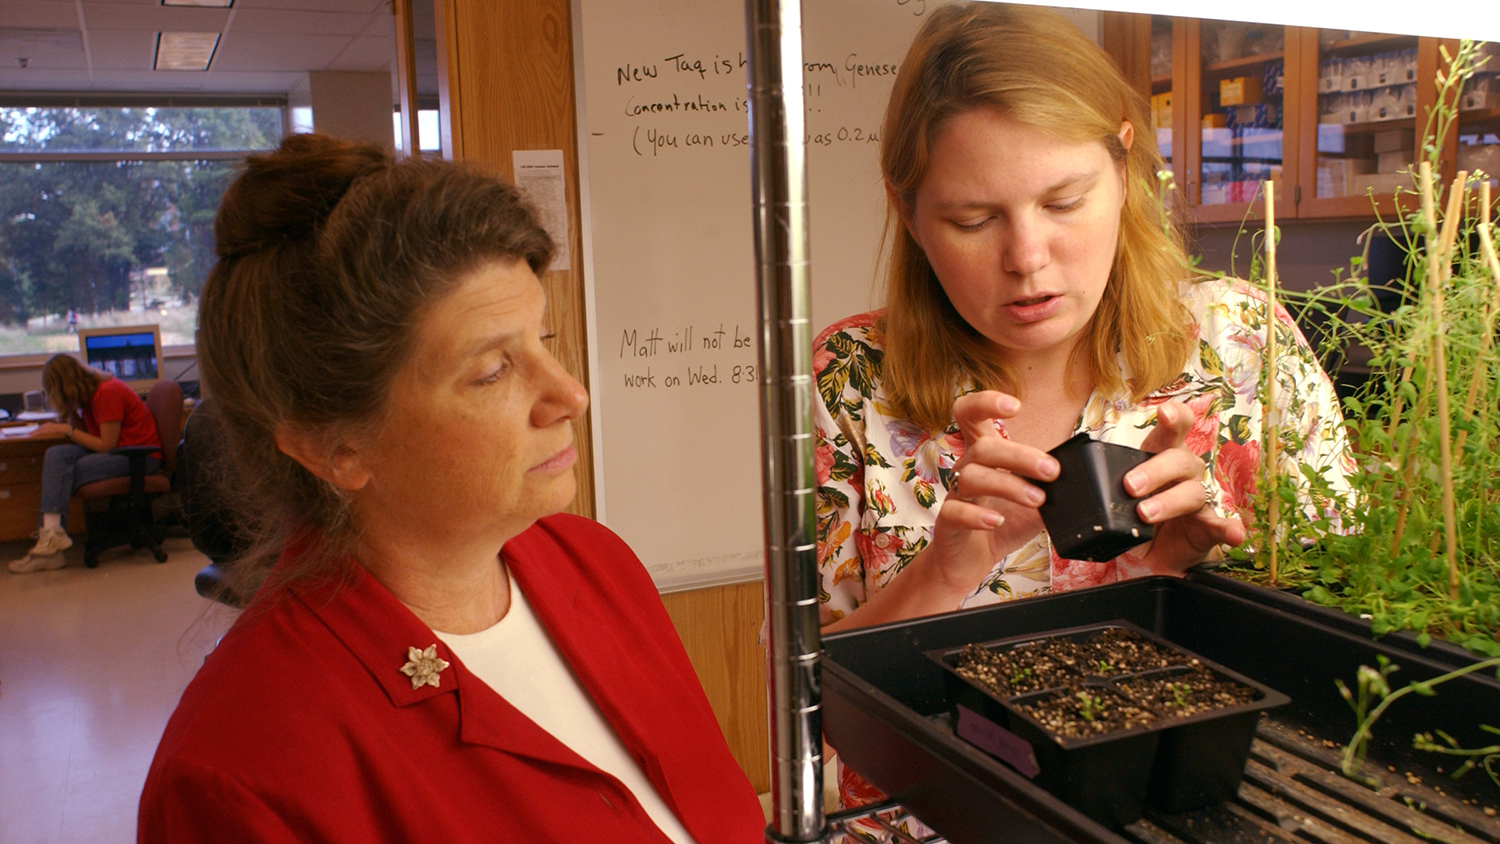 Professor Daub with a student looking at a plant in the classroom.